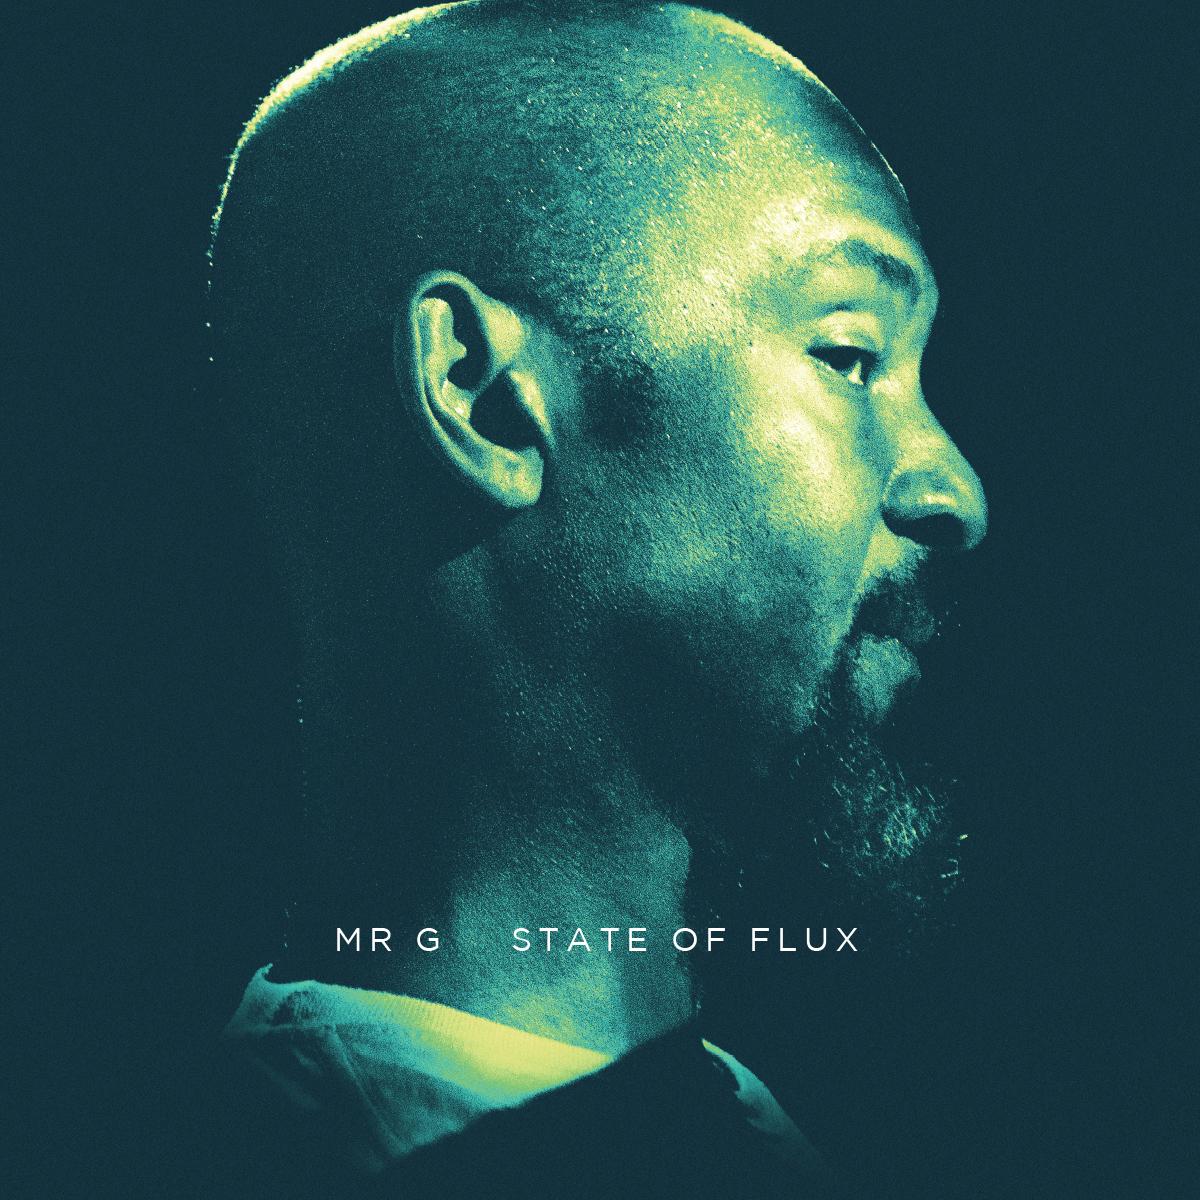 Mr. G/STATE OF FLUX EP 12"